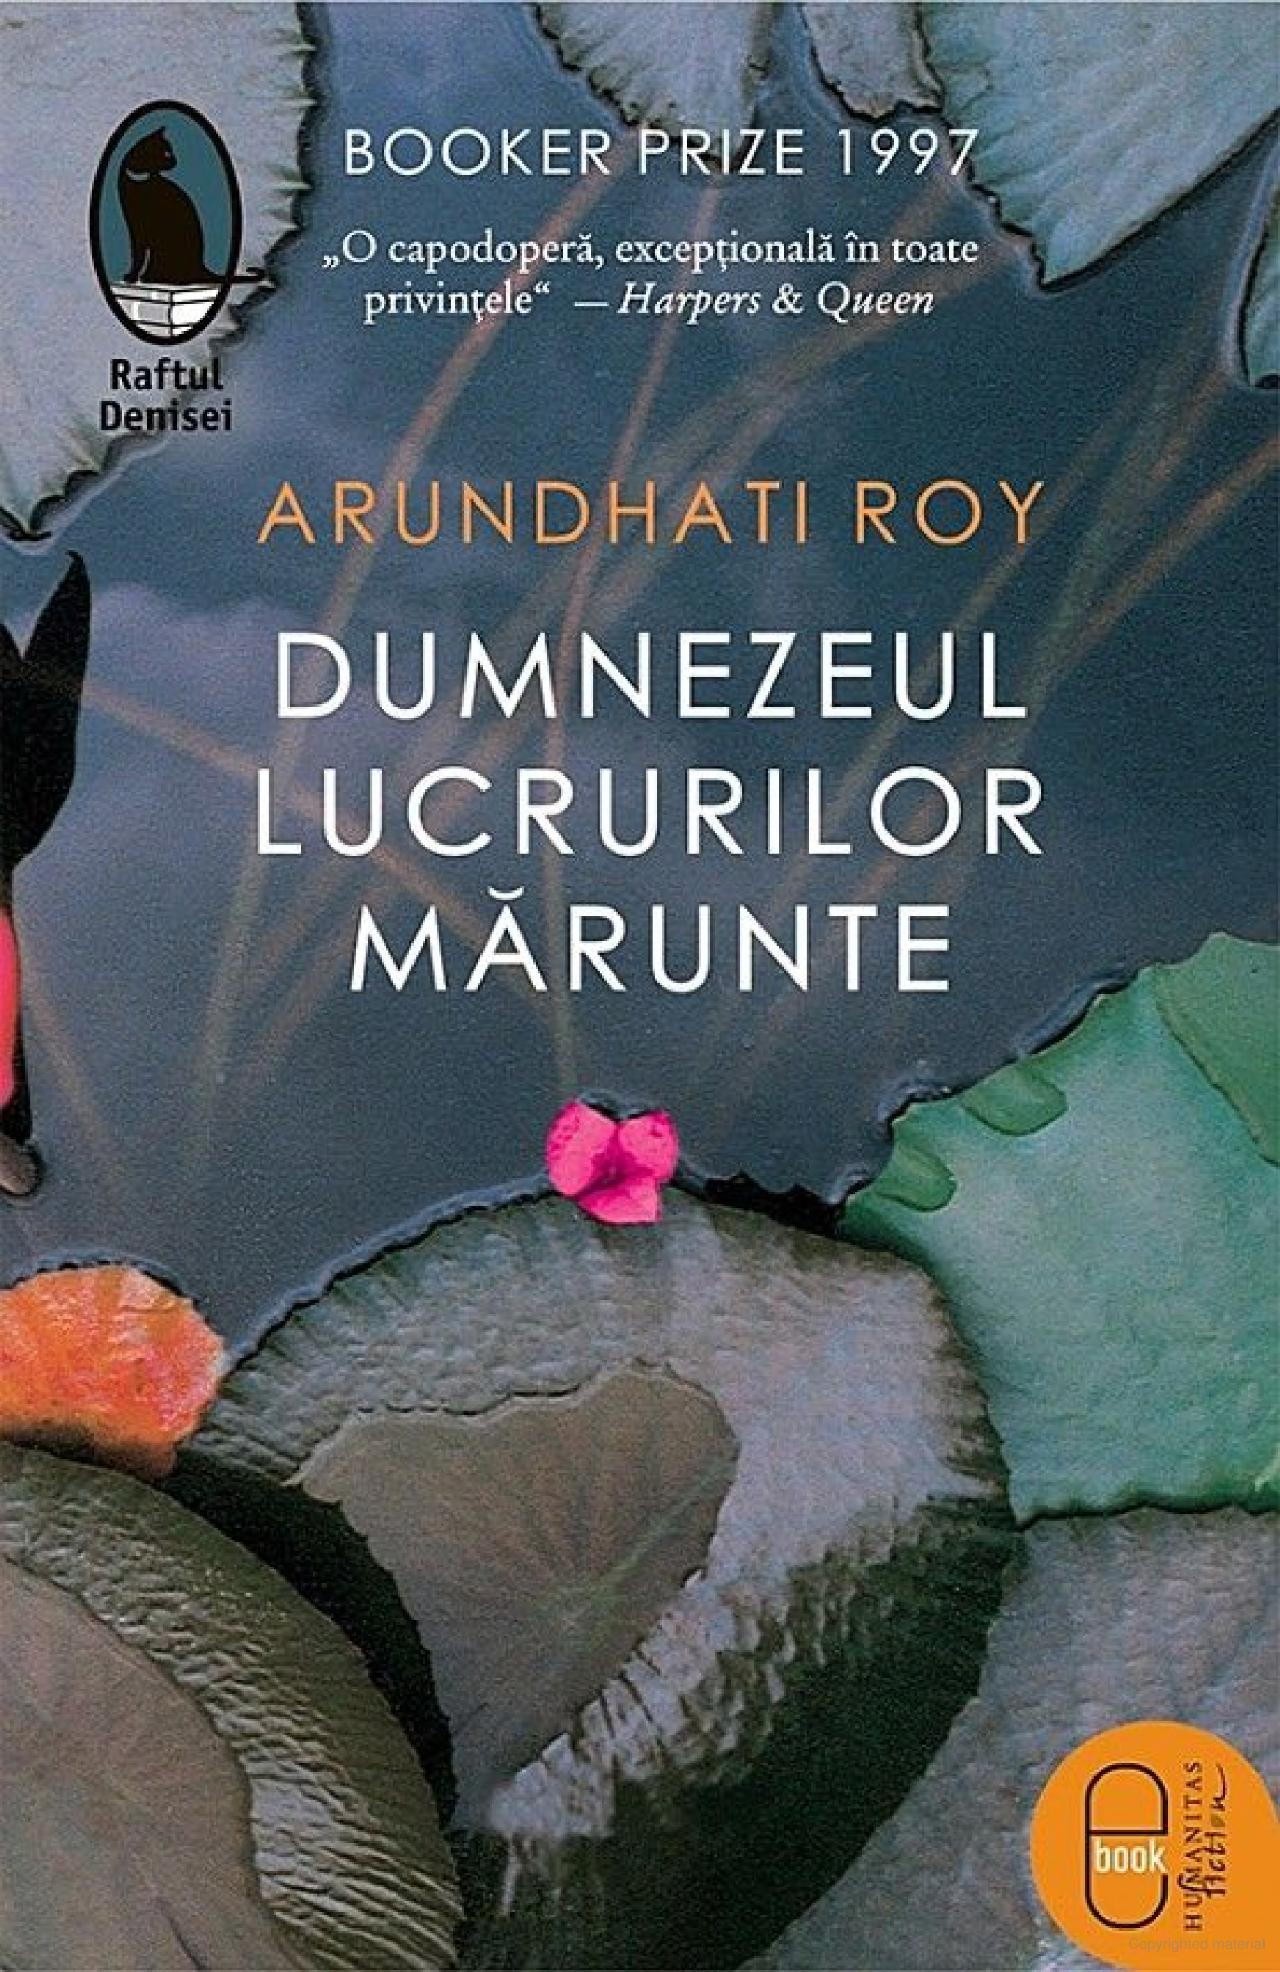 The God of Small Things
Novel by Arundhati Roy